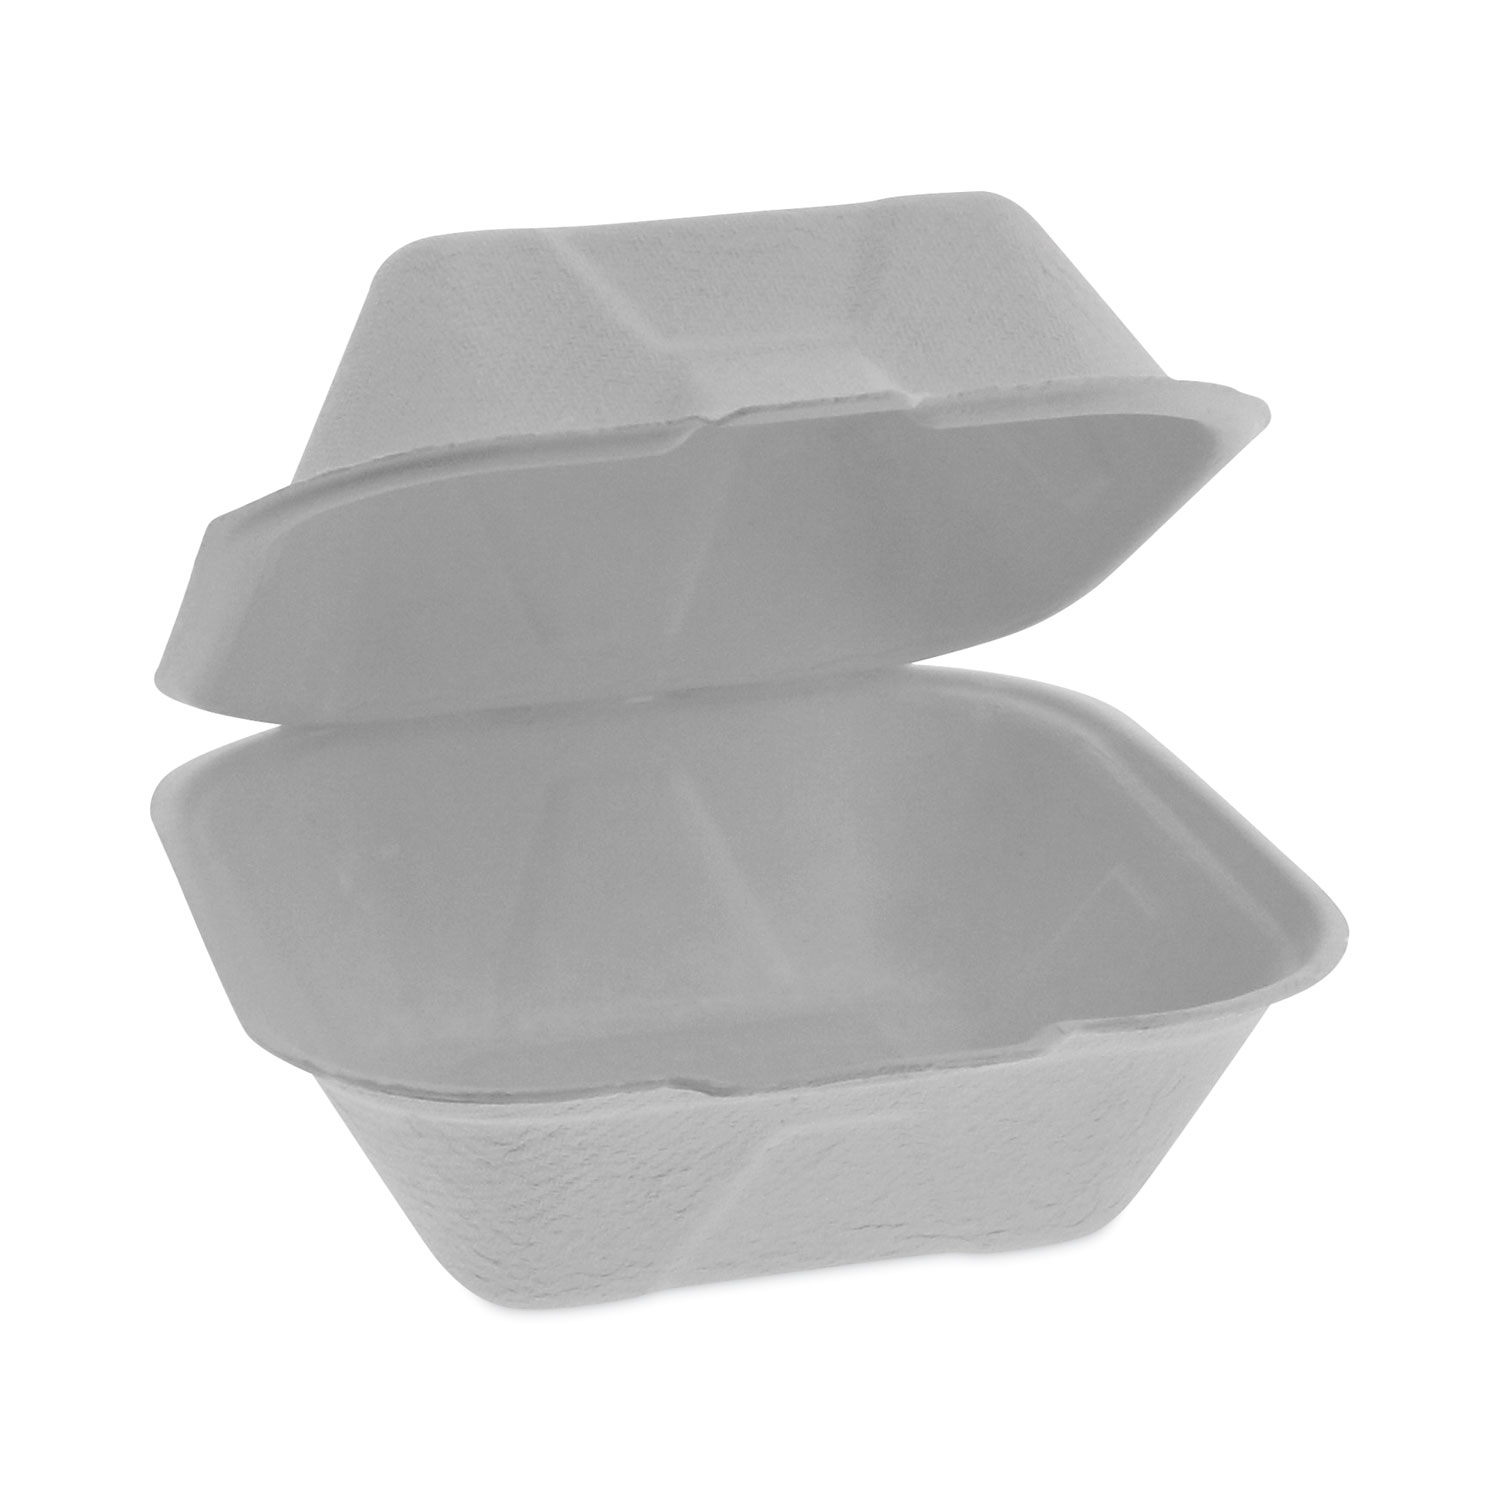 150-Count 3-Compartment Hinged White Meal Prep/Take Out Containers - 9